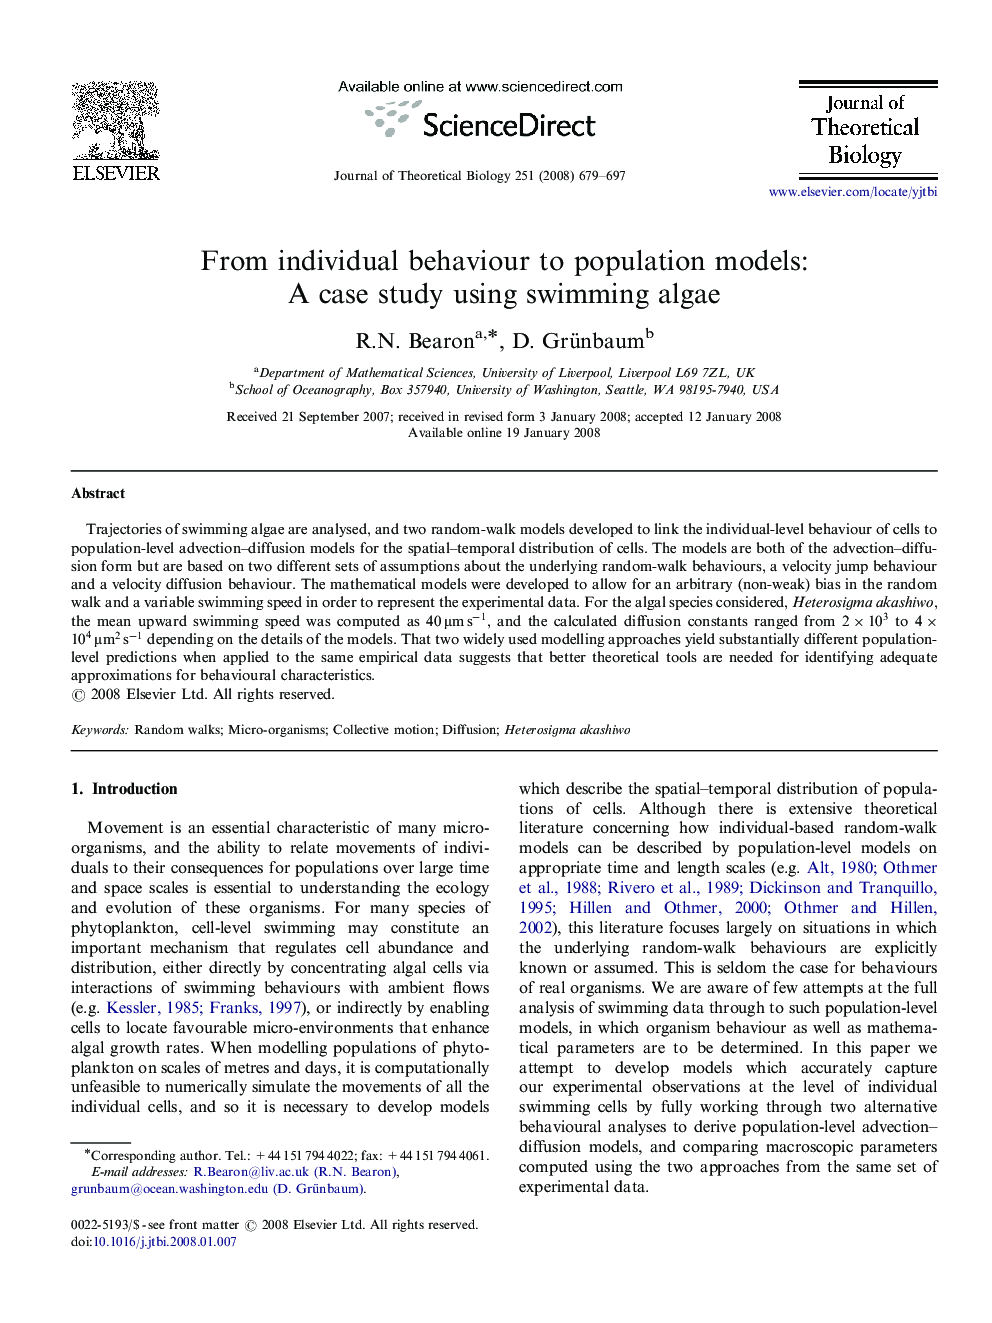 From individual behaviour to population models: A case study using swimming algae